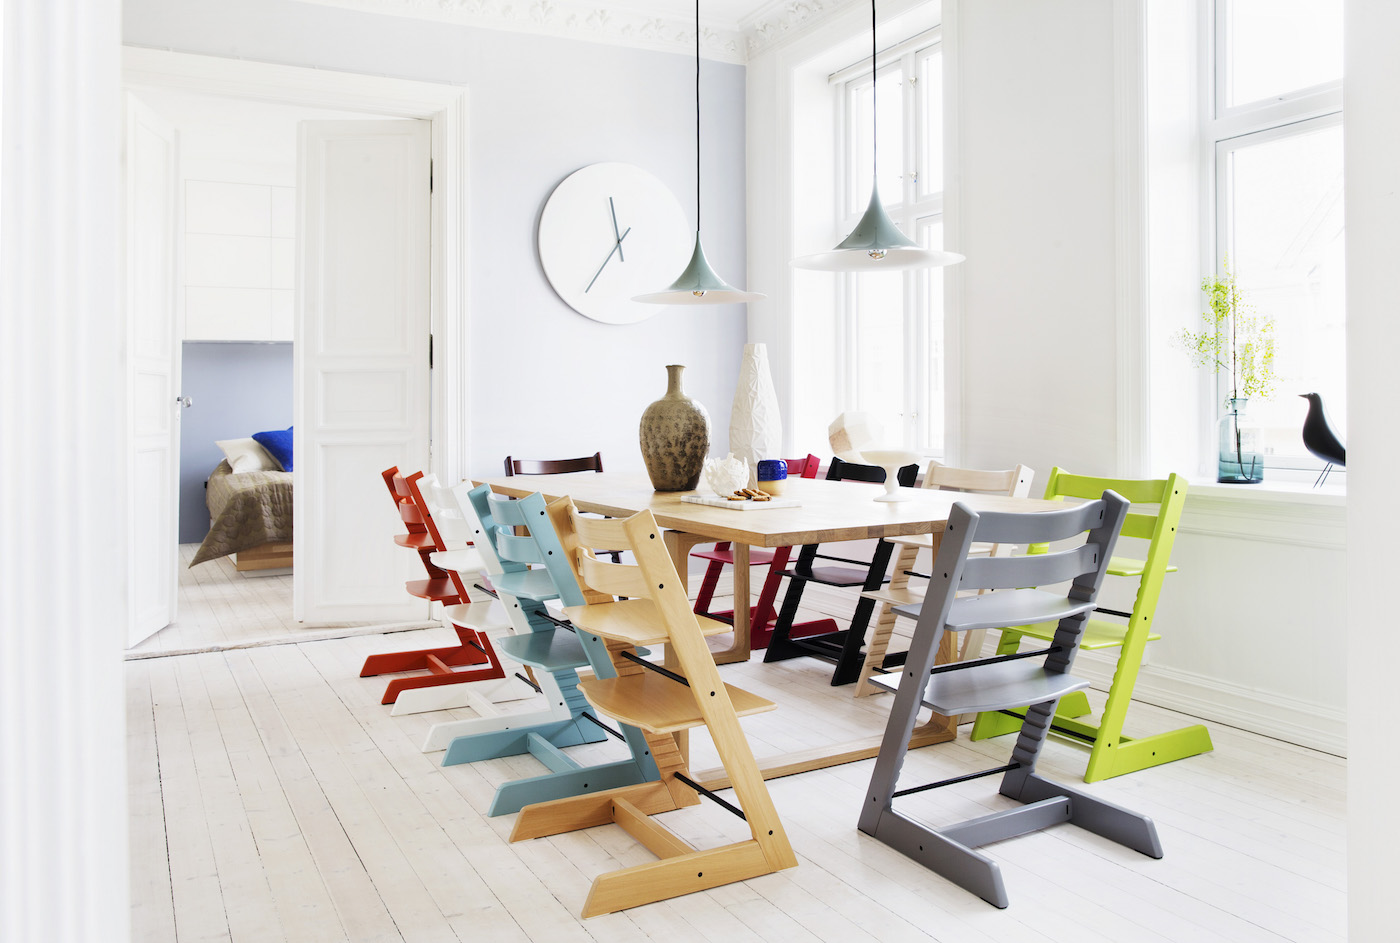 History: Tripp Trapp by Peter Opsvik for Stokke - Design Father